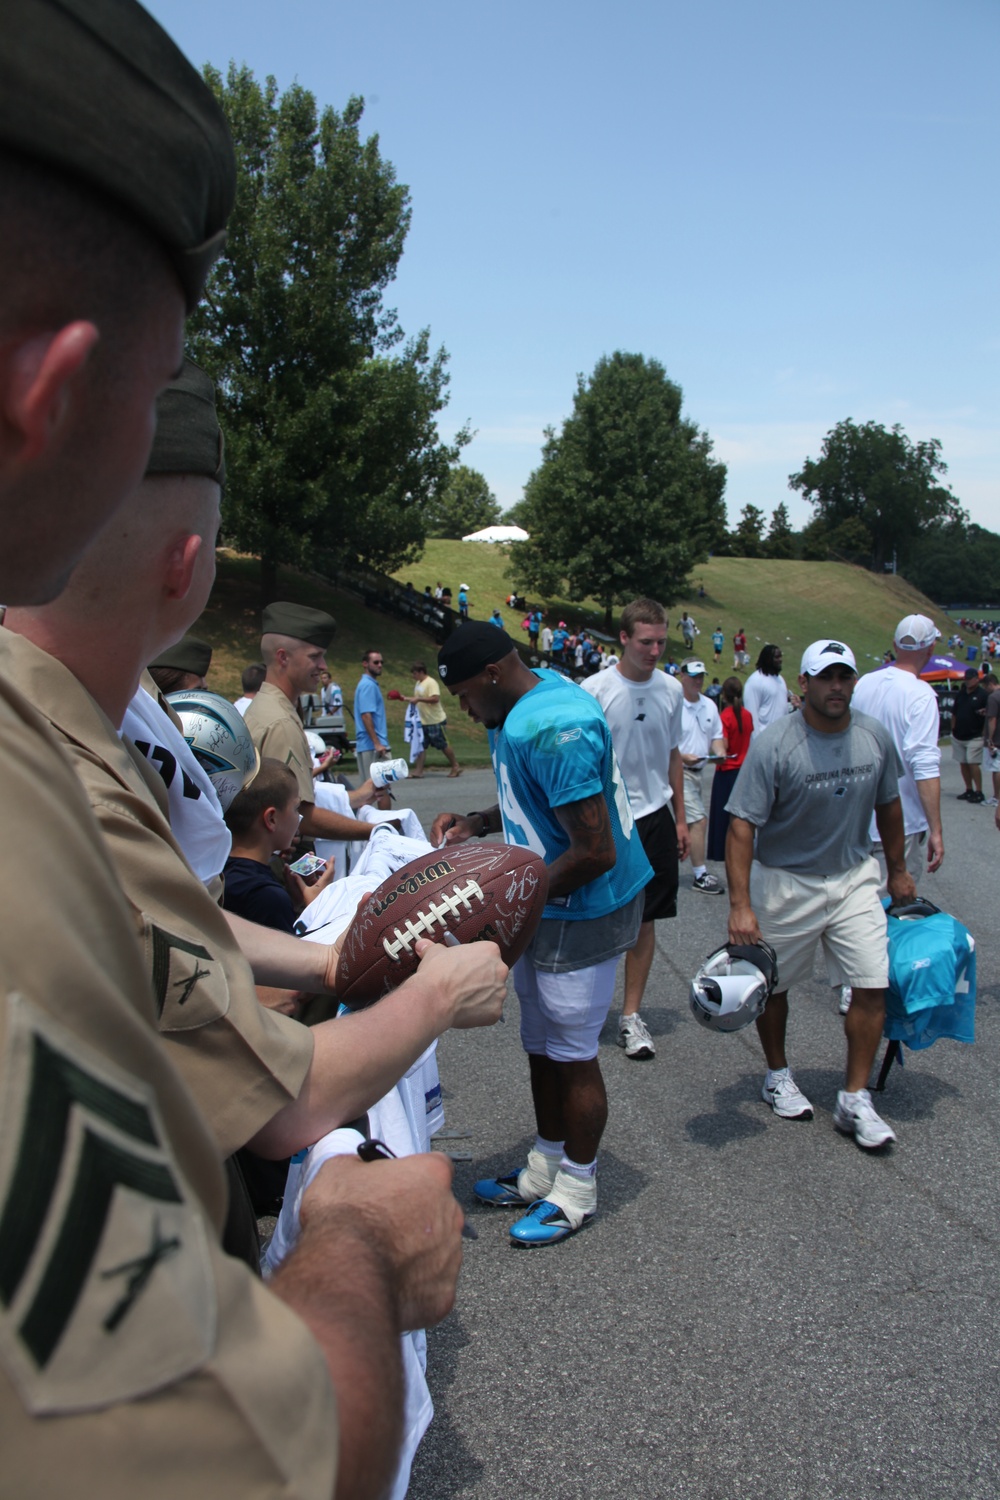 Football fever: Cherry Point Marines get preview of Carolina Panthers 2011 season during training camp